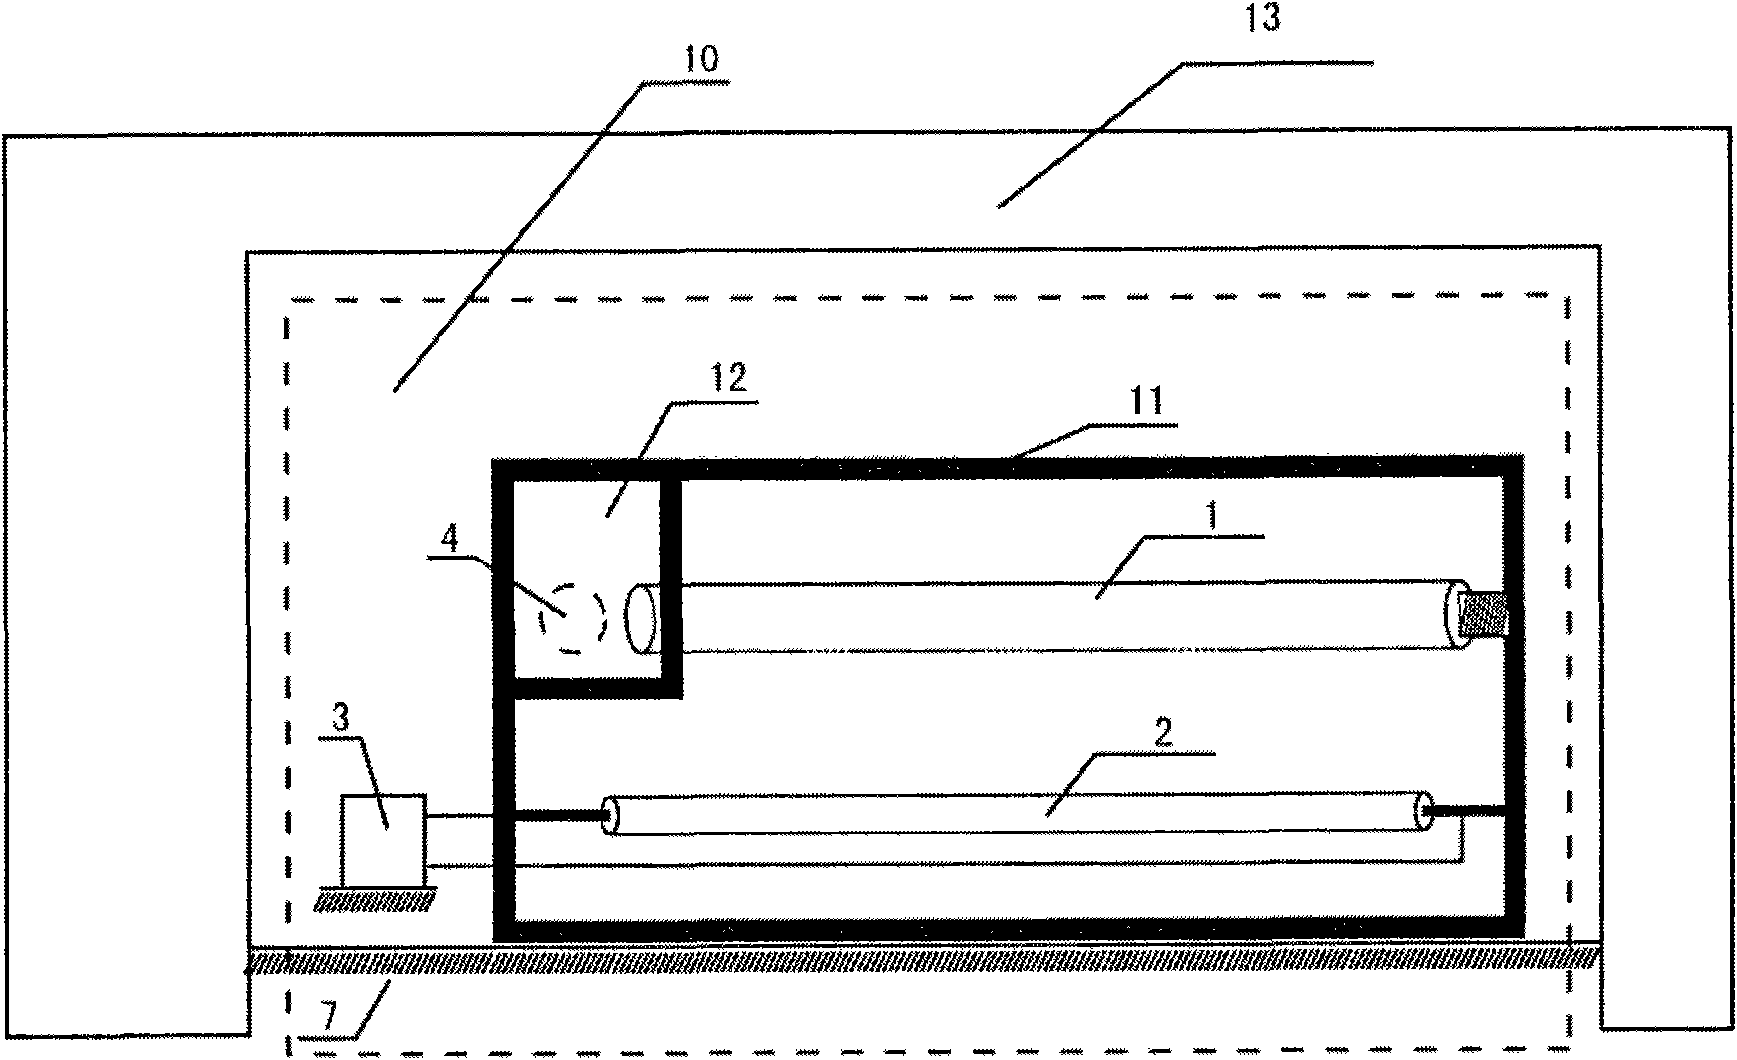 Automatic drying system of monochromatic gravure press